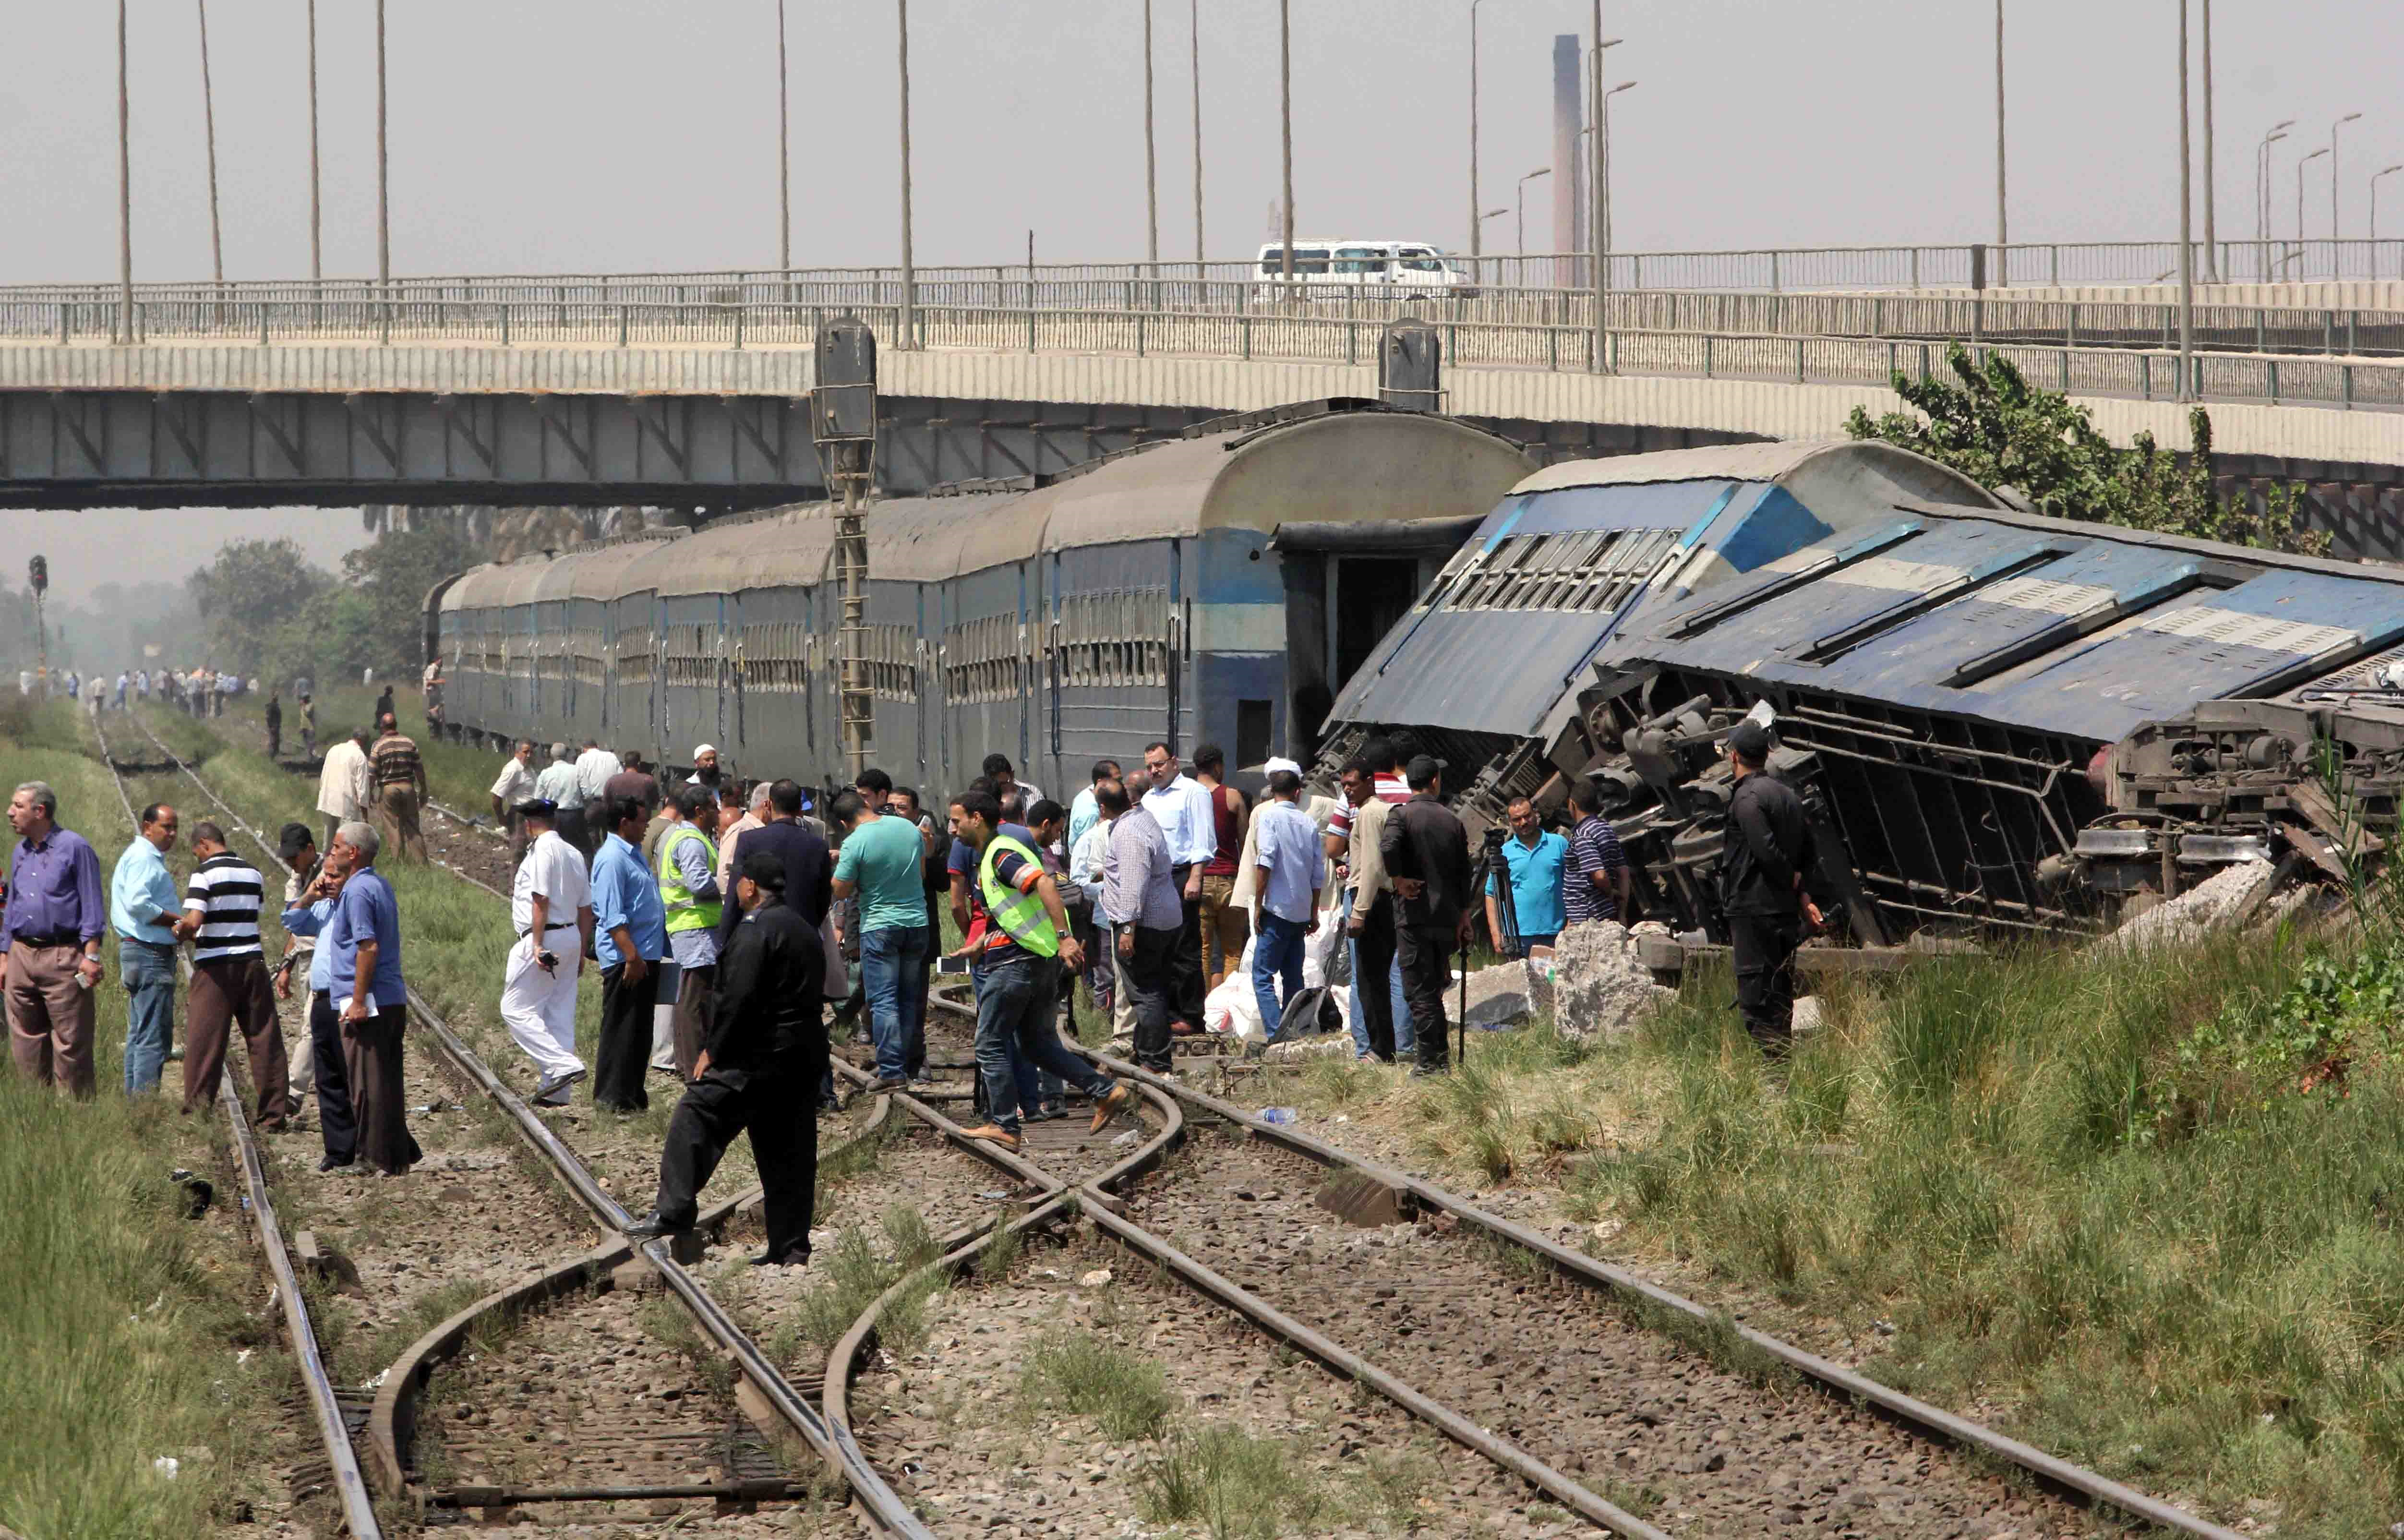 Egyptians check the wreckage of a train after it derailed near the village of Al-Ayyat in Giza on the southern outskirts of the capital Cairo, on September 7, 2016. The conductor suddenly hit the breaks when he spotted a problem with the tracks, causing three carriages to overturn, officials said.  / AFP PHOTO / STRINGER